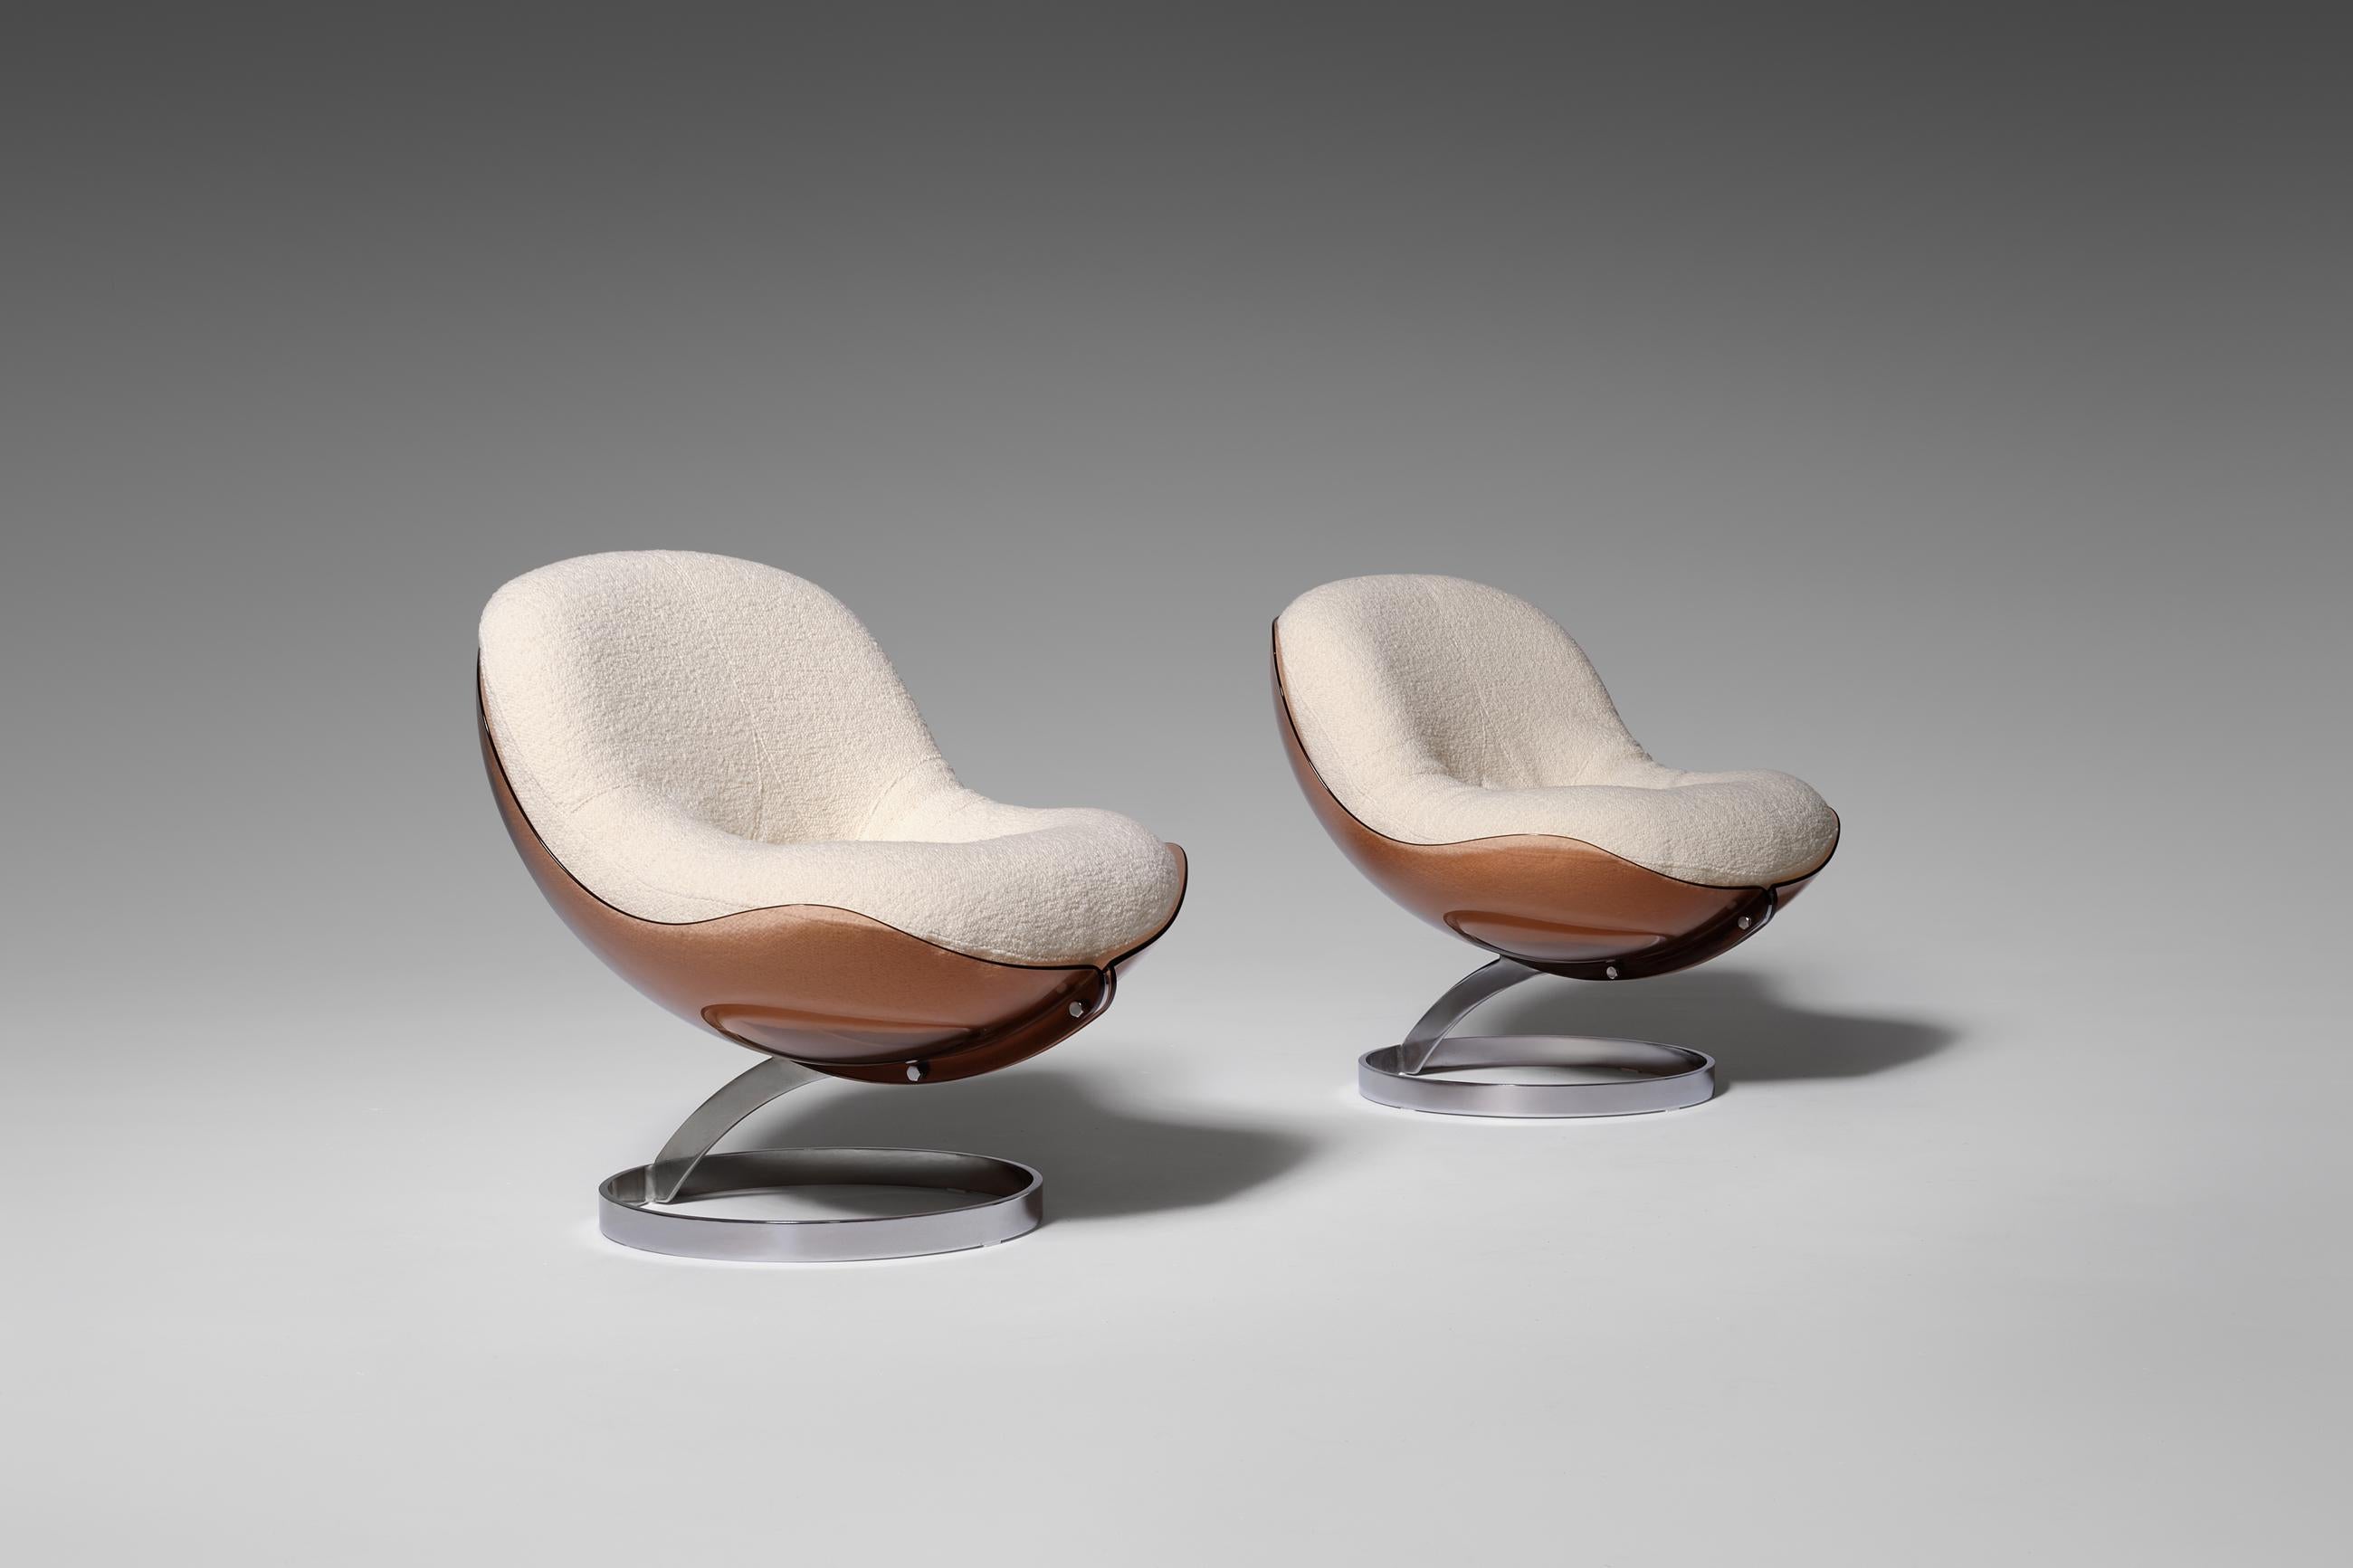 Iconic 'Sphere' lounge chairs by Boris Tabacoff for MMM; 'Mobilier Modular Moderne', France 1971. Stunning unique design made of transparant bronze colored Lucite shells on a circular chromed base. The shells and chrome are re-polished into